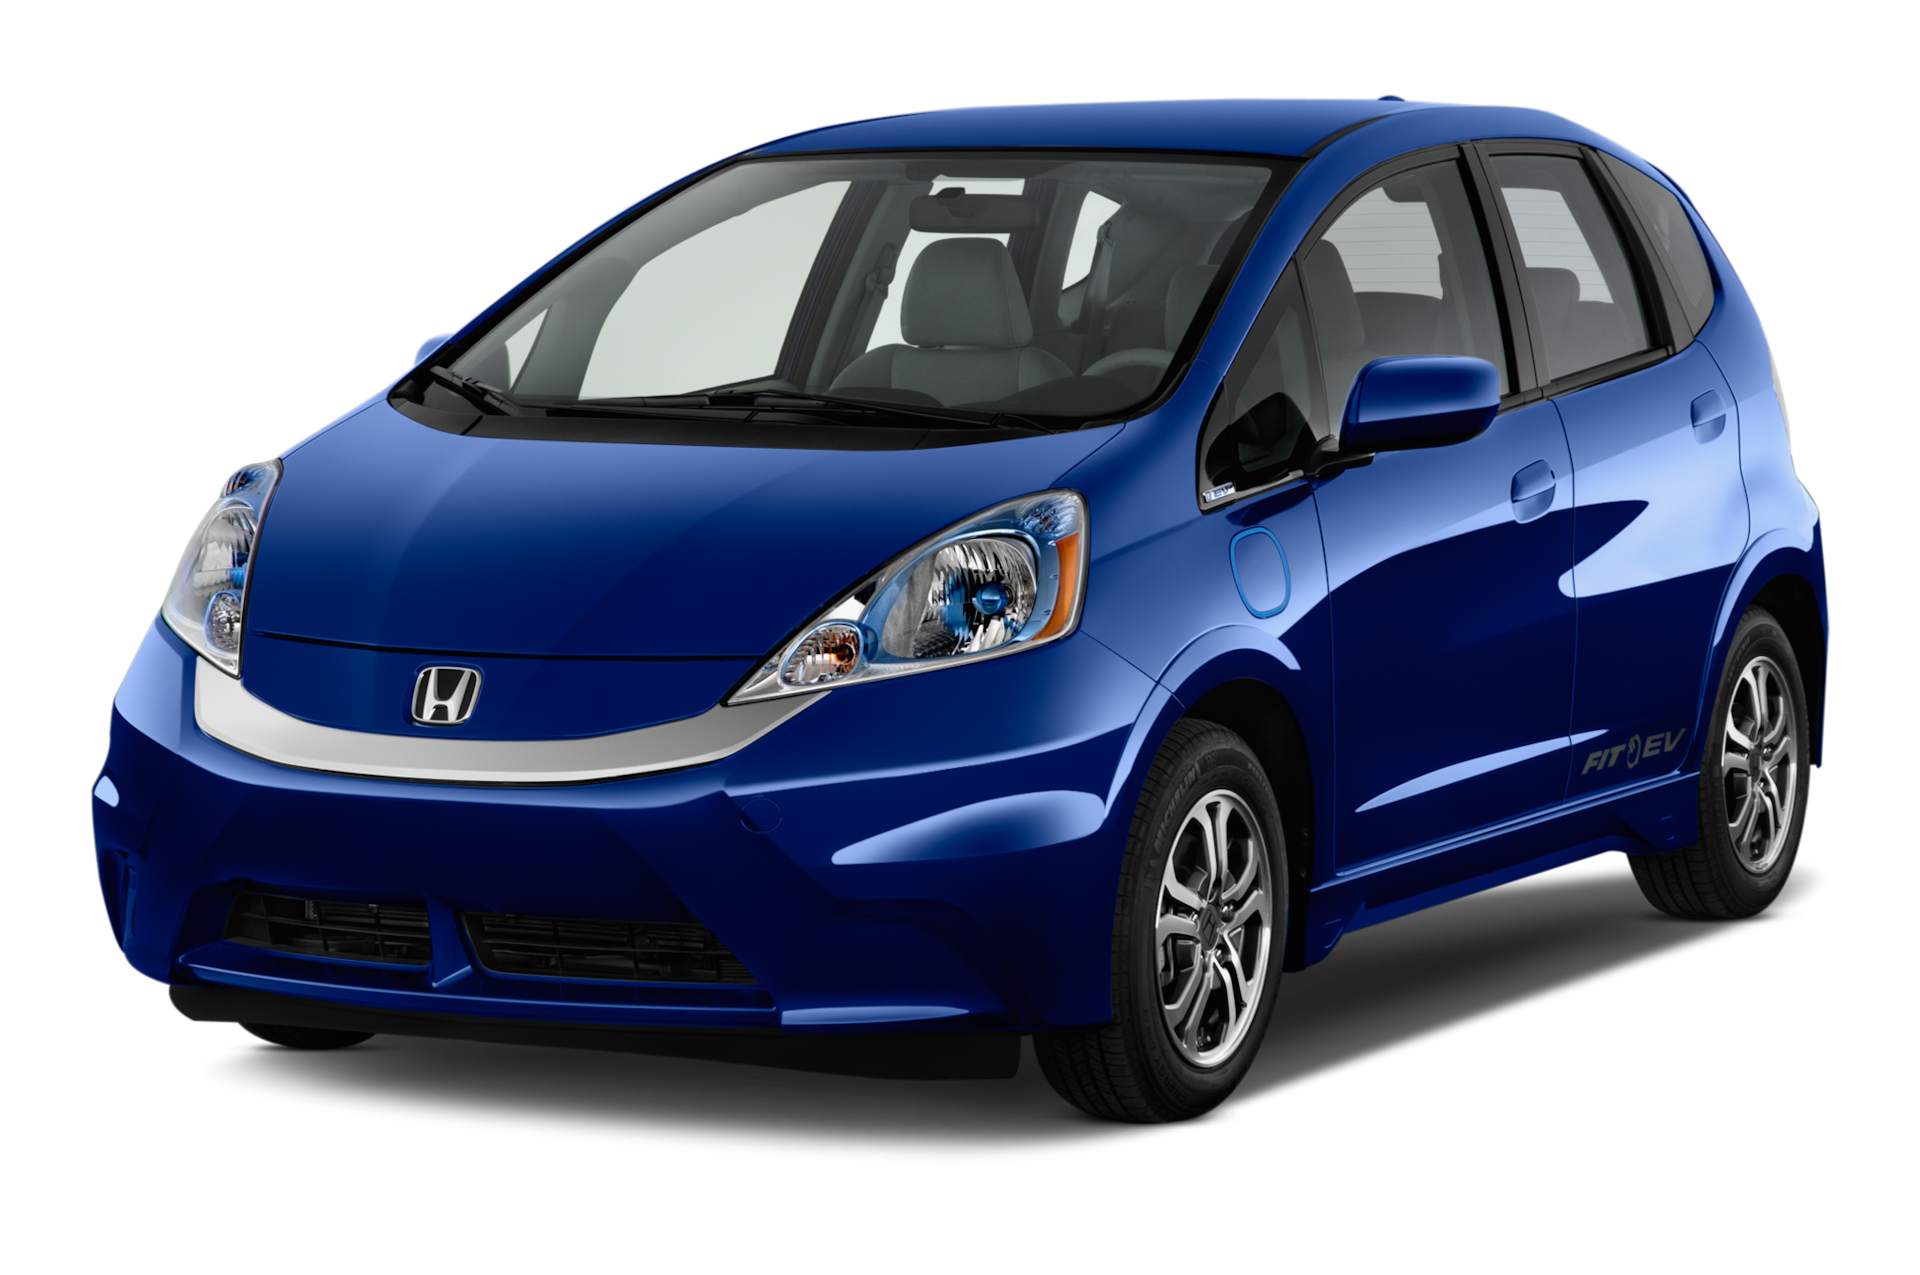 2014 Honda Fit EV Prices, Reviews, and Photos - MotorTrend